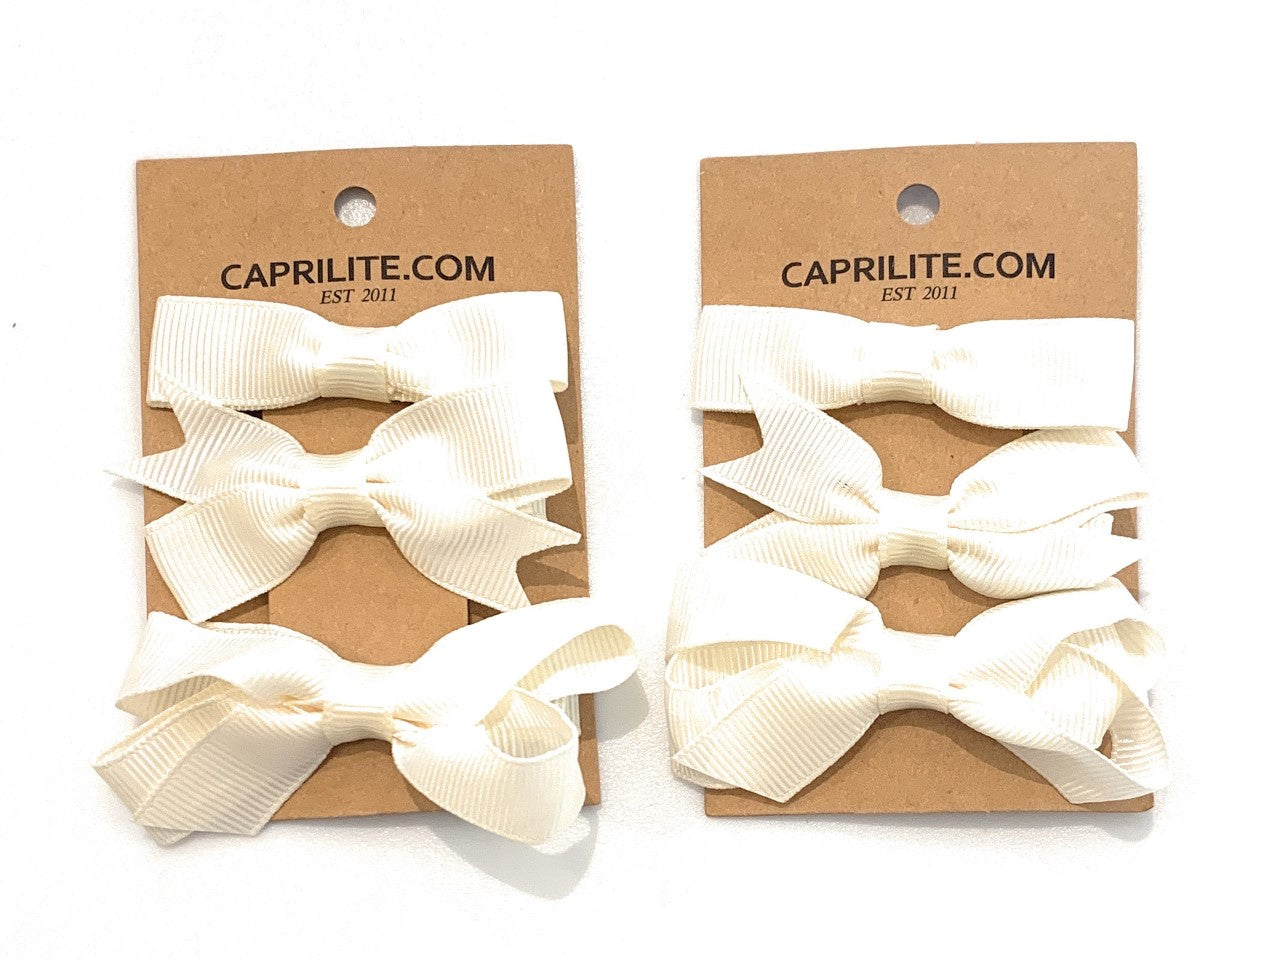 6 PIECE /3 Pairs SET Girls Small Hair Bows Grosgrain Ribbon Clips School Colours - Ivory Cream Wedding Party